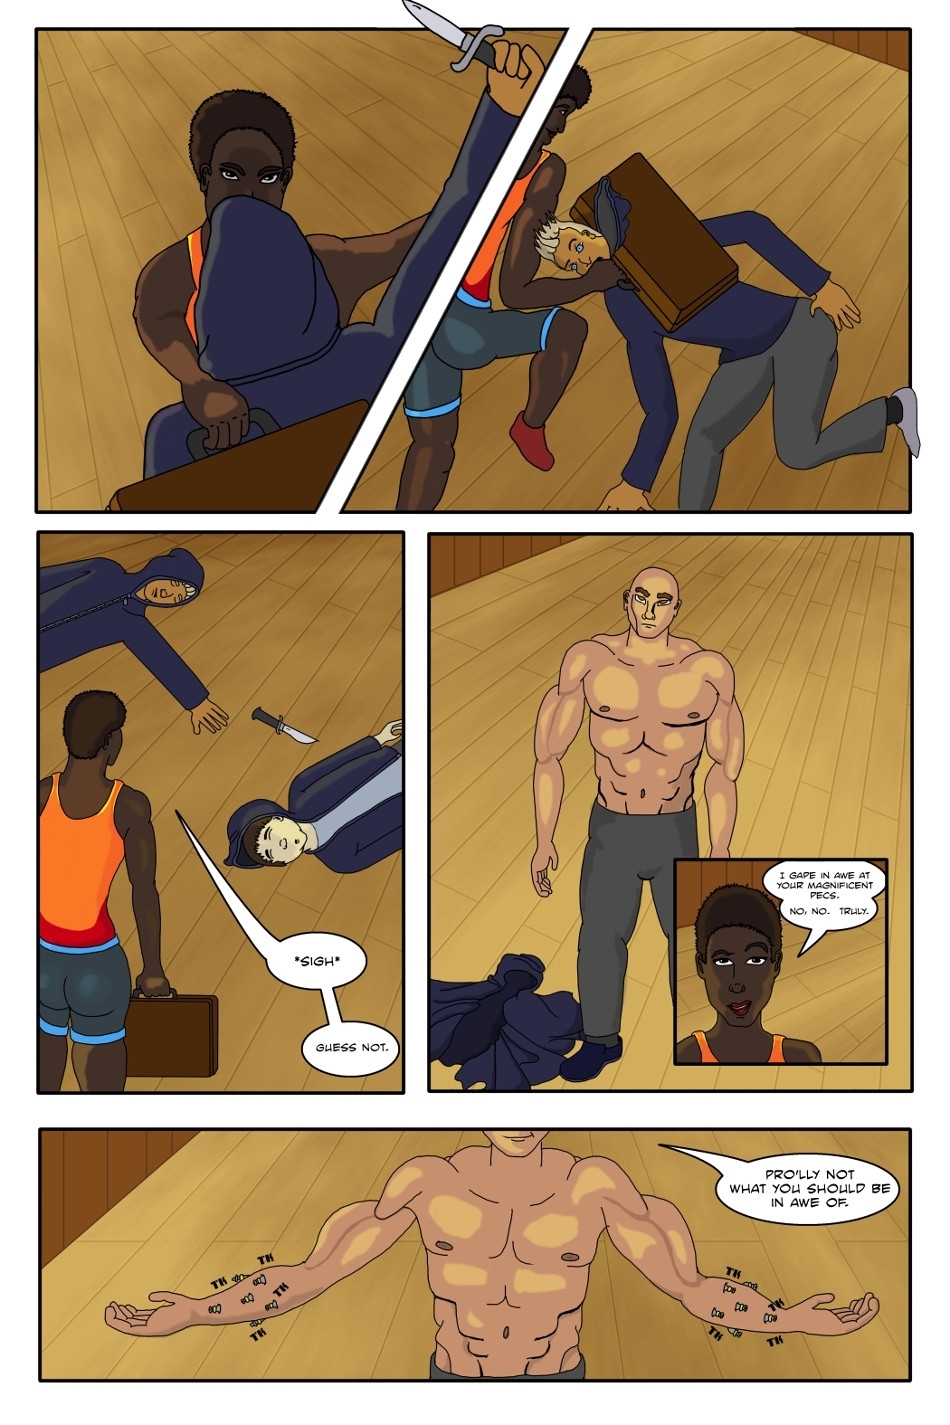 Issue 1, Page 4